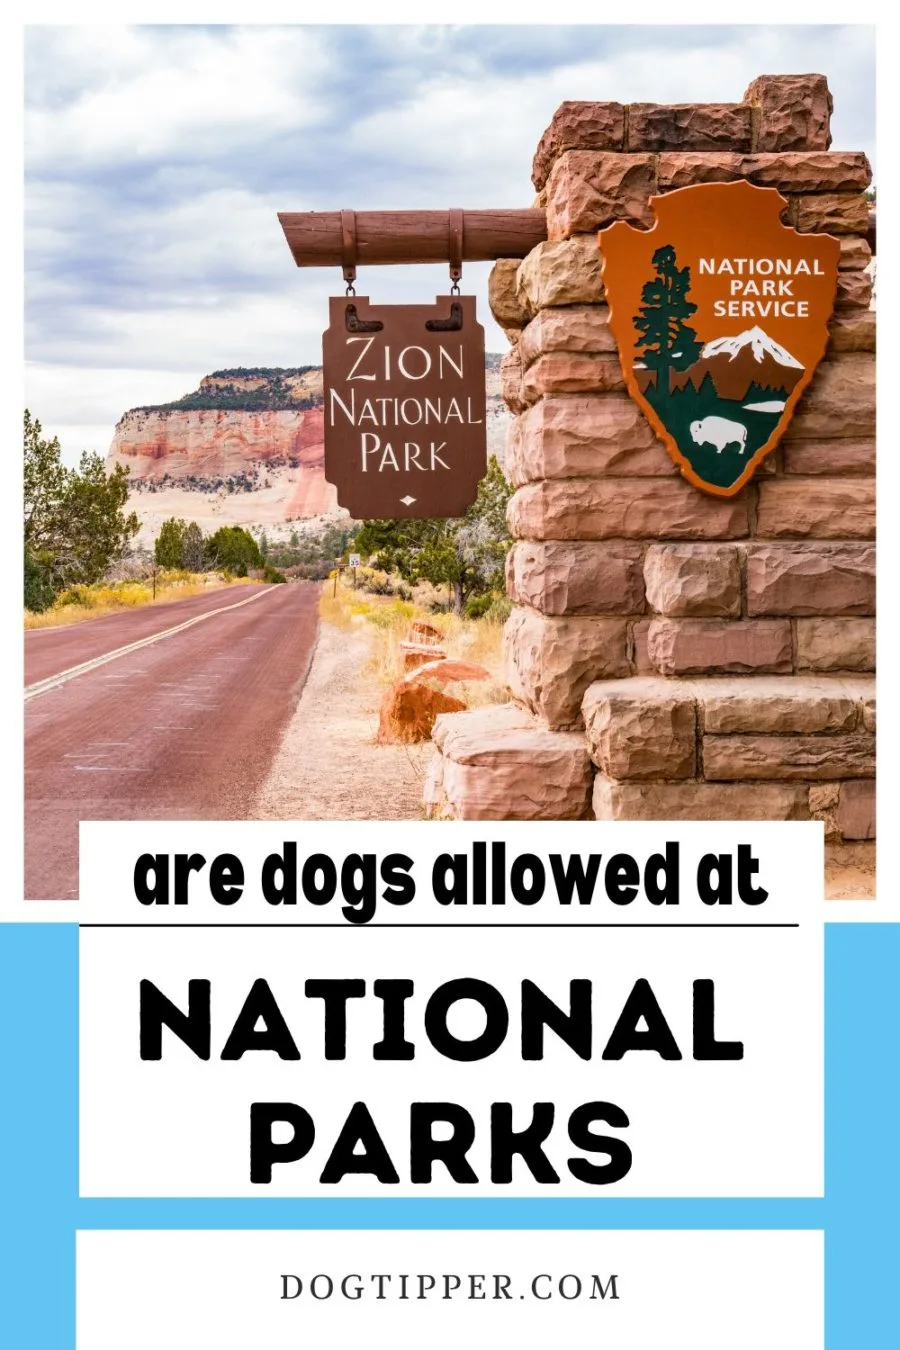 Can I bring my dog to a national park?